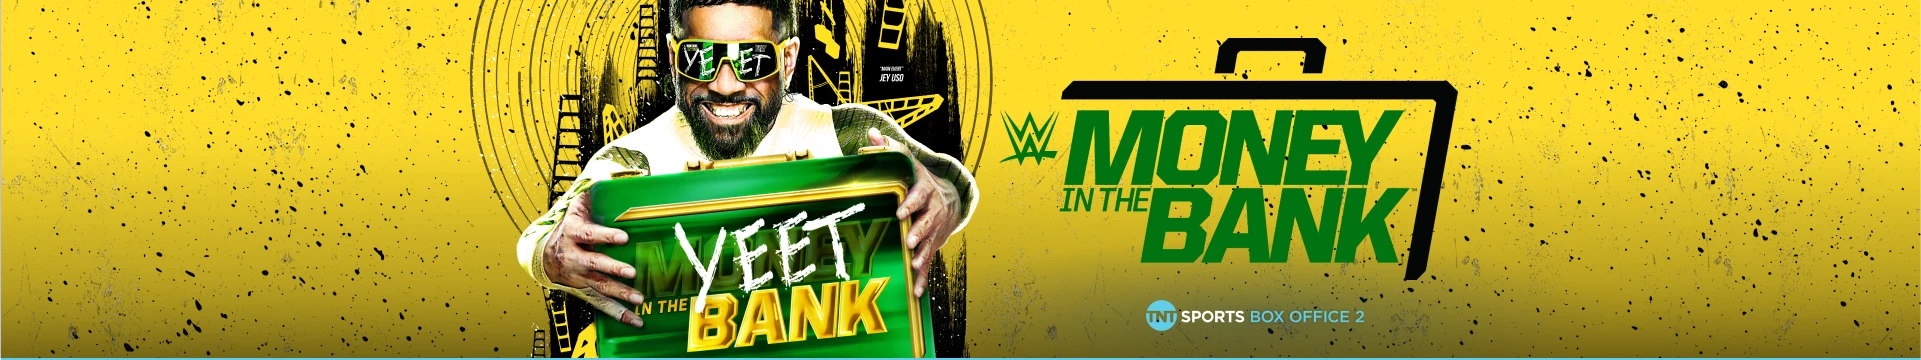 WWE - Money in the Bank on TNT Sports Box Office 2